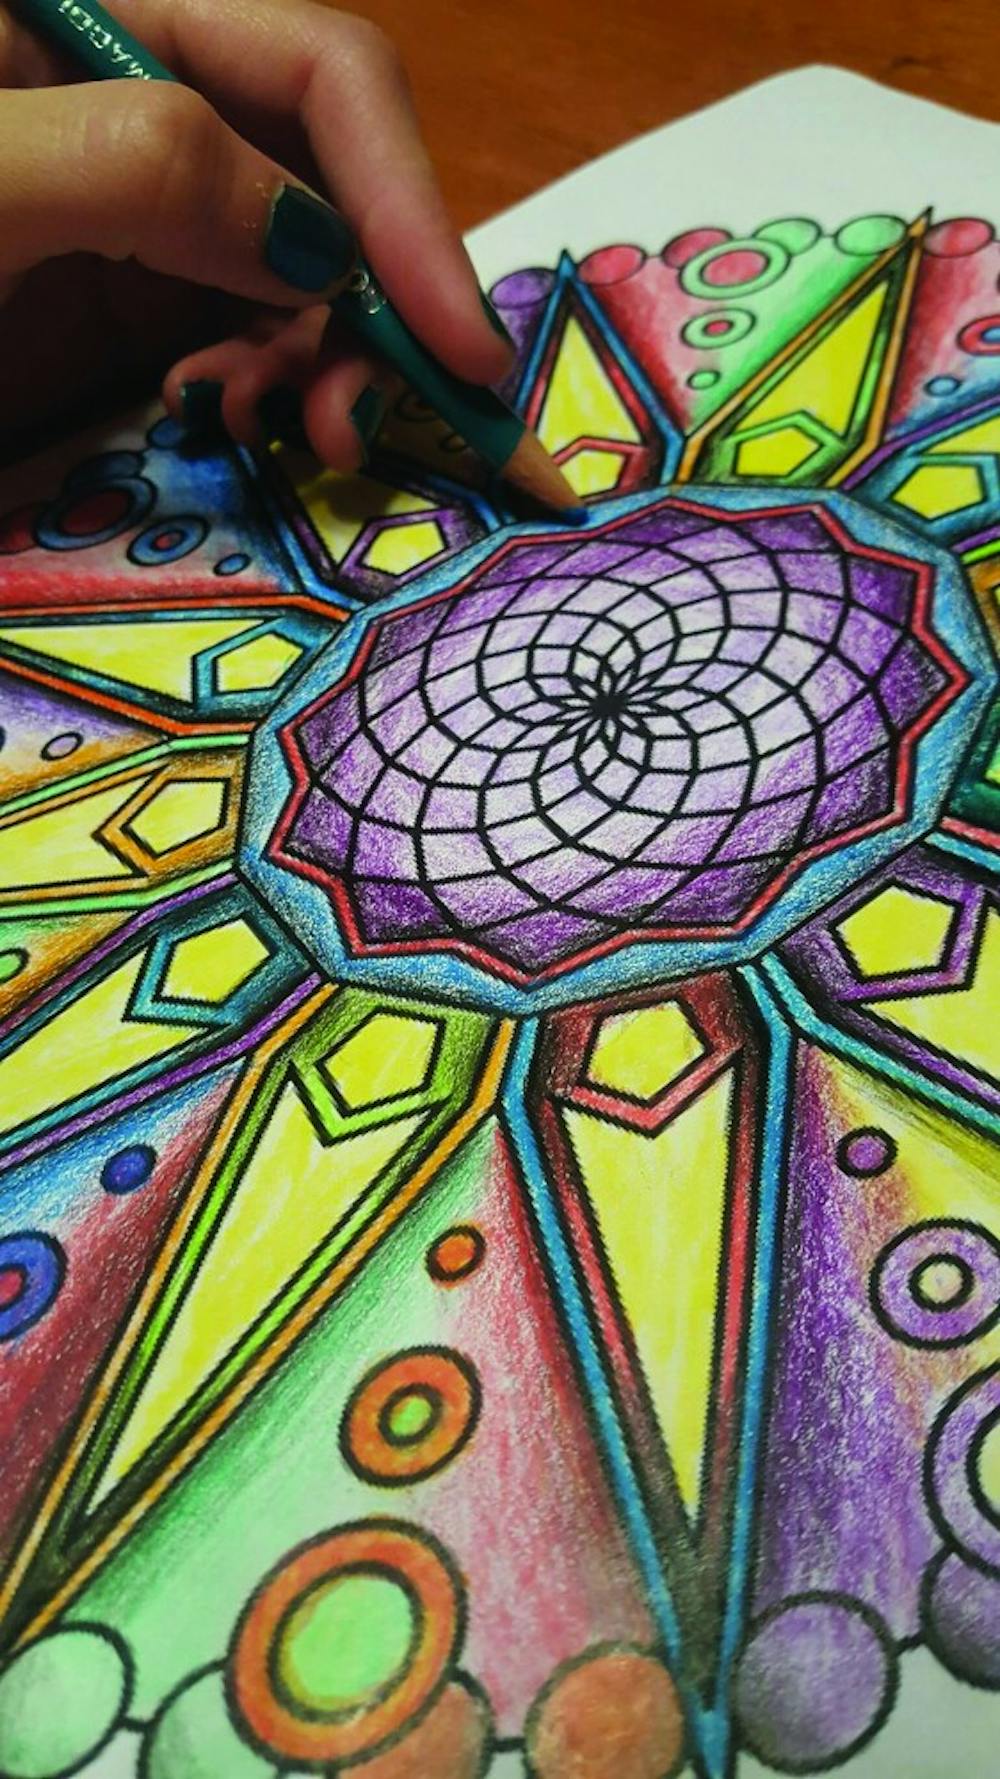 Students relieve stress with aromatherapy and coloring